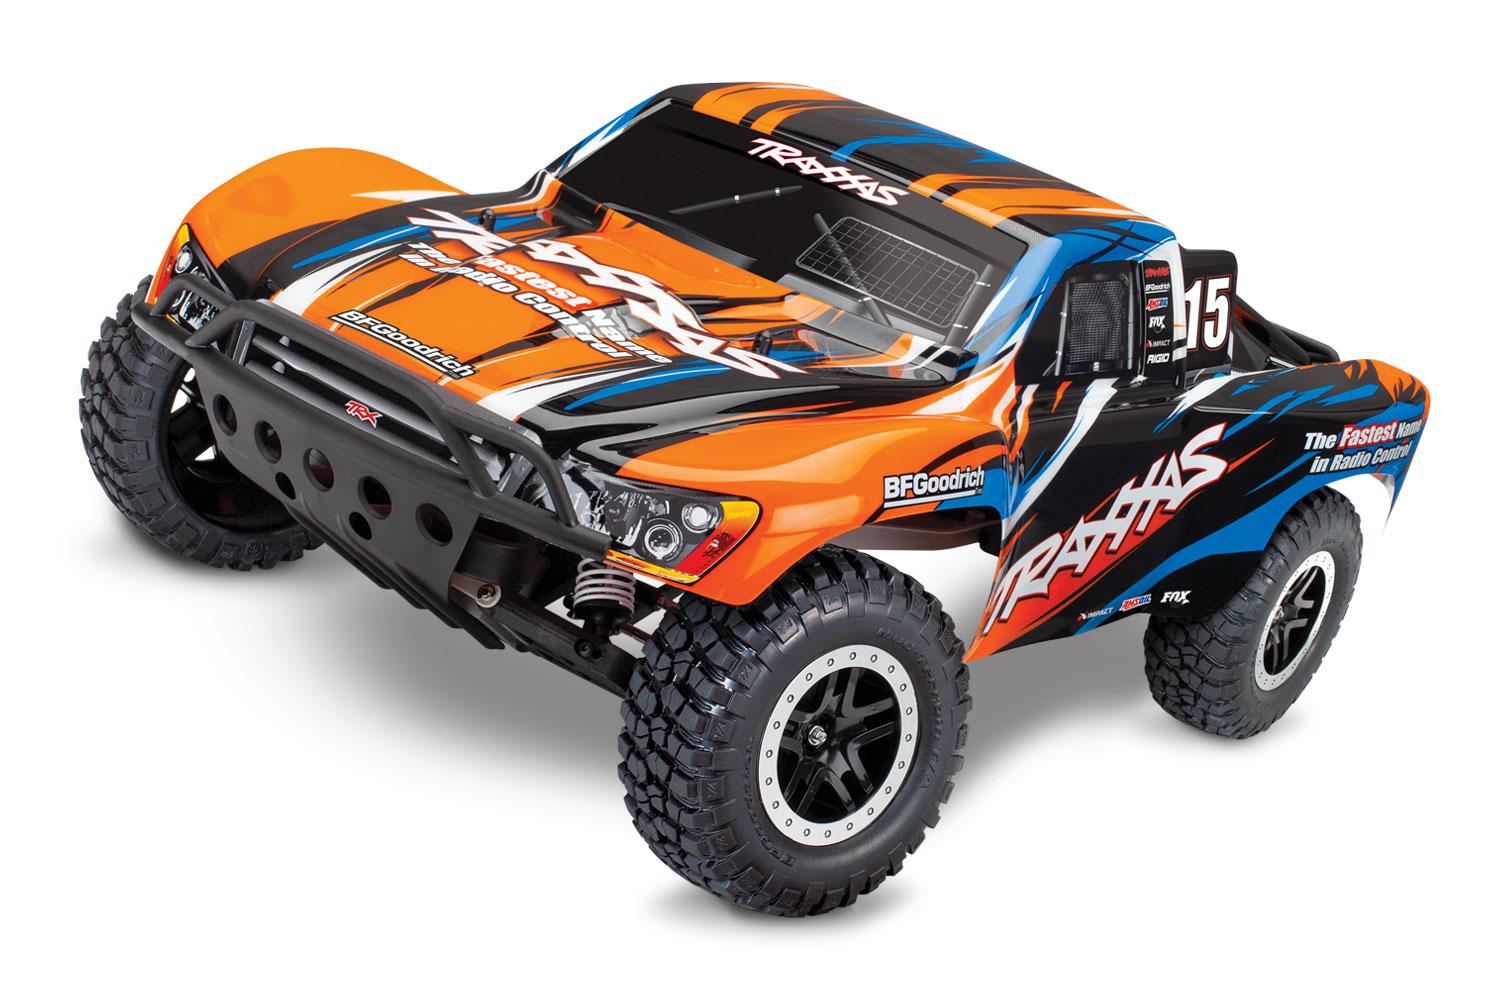 Traxxas Rc Cars Under $50: Keeping Your Traxxas RC Car Under $50 in Top Condition